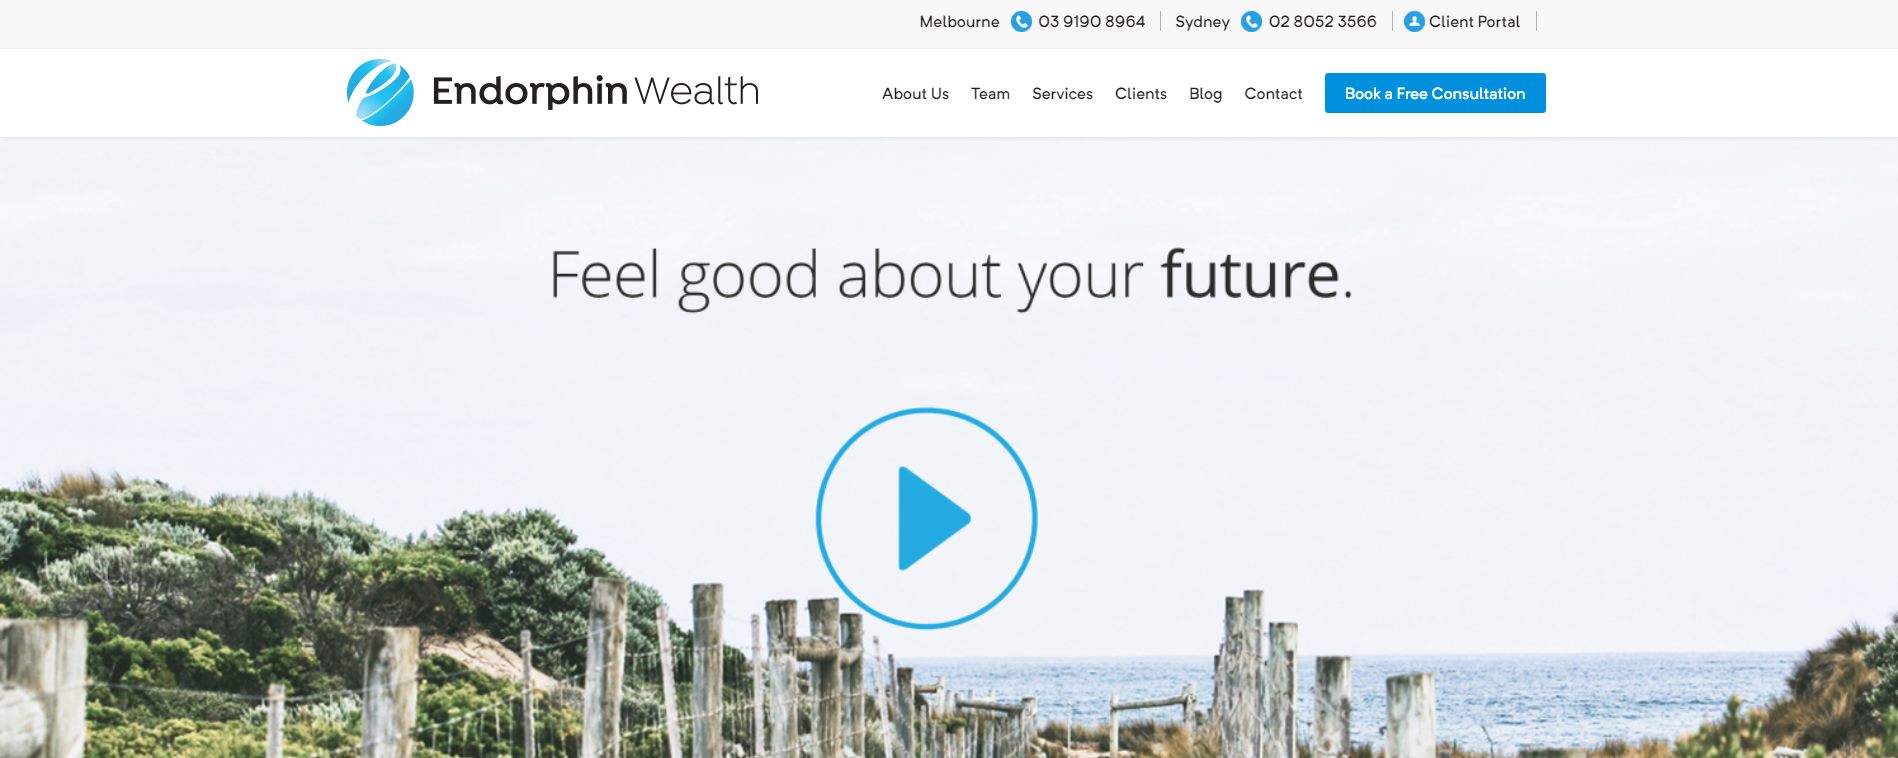 endorphin wealth financial planners & advisors melbourne